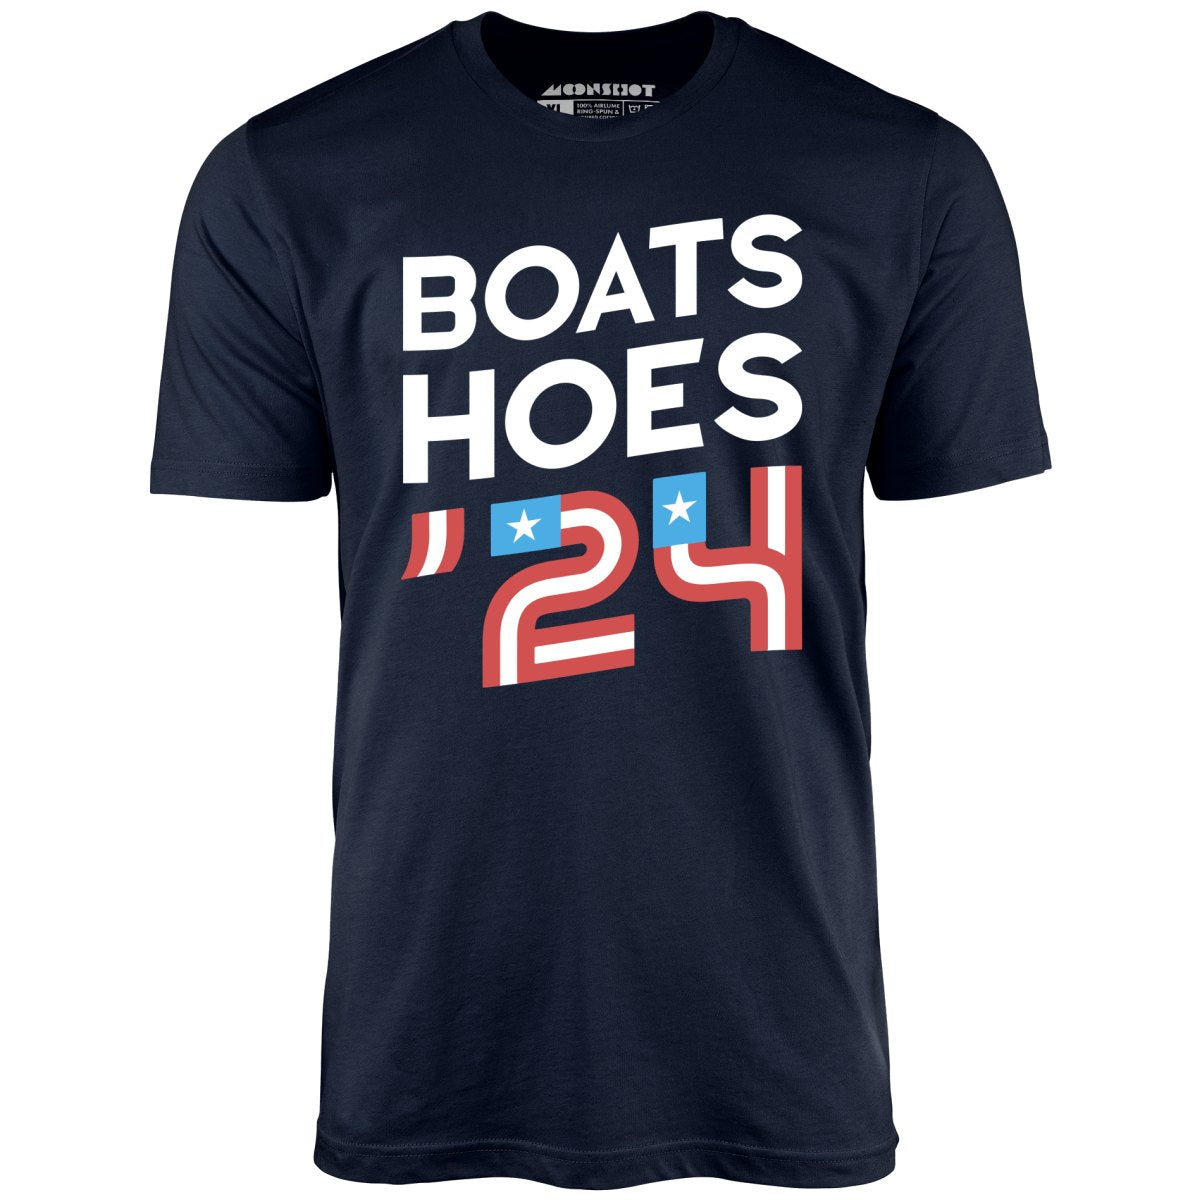 Boats & Hoes '24 - Unisex T-Shirt